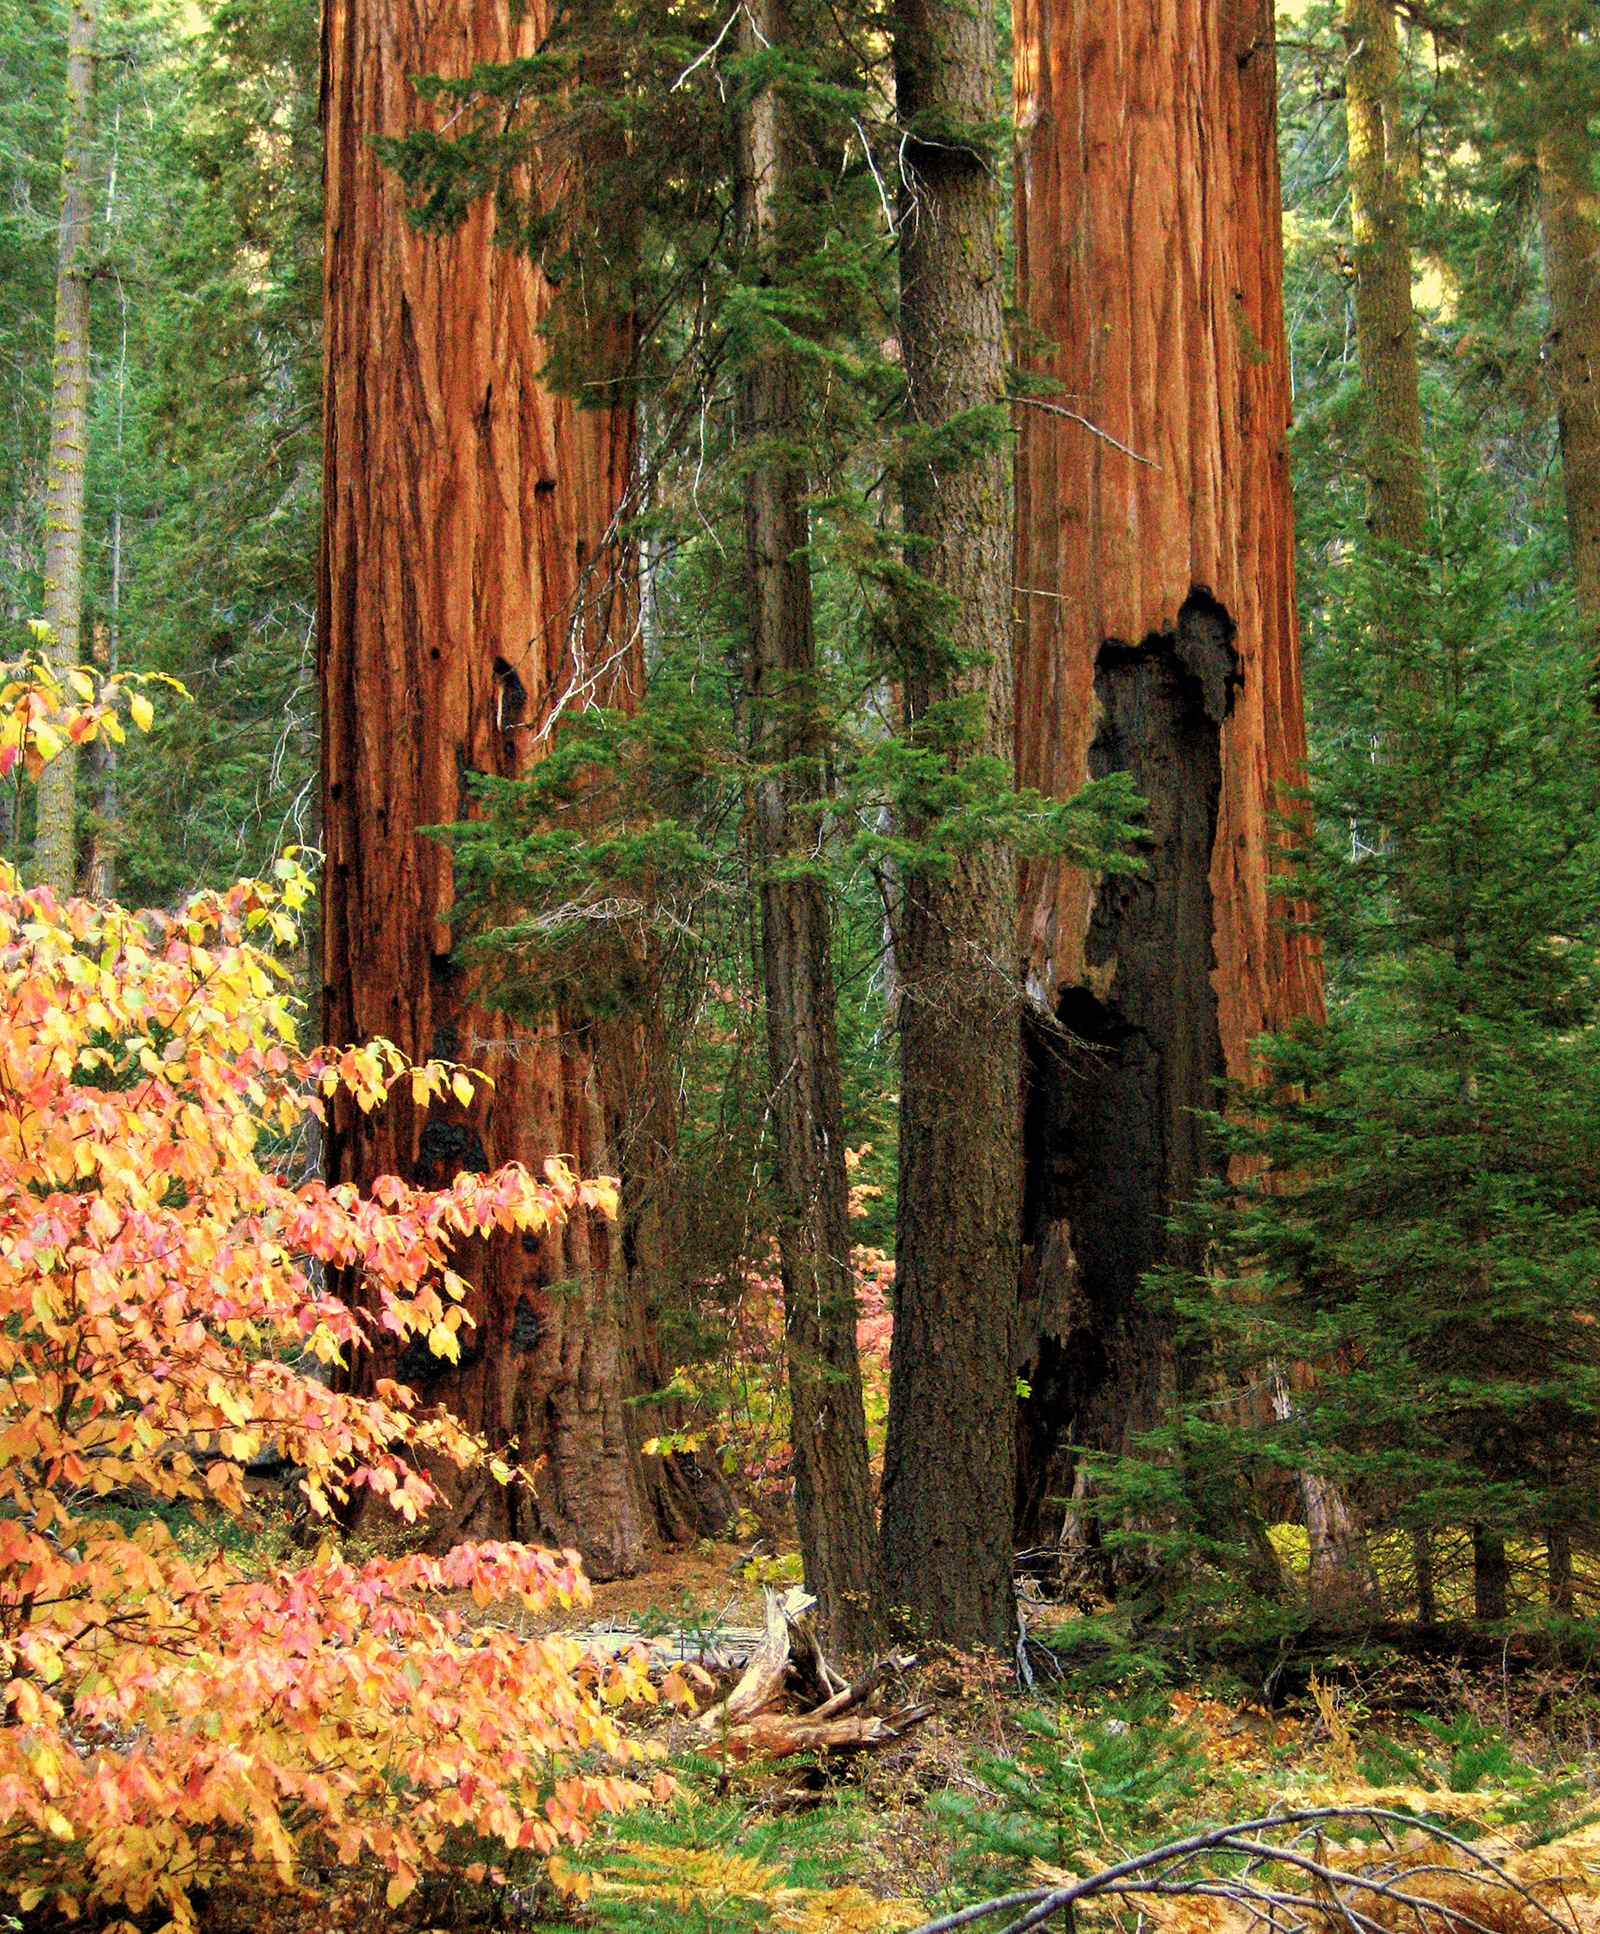 Giant Sequoias - Sequoia & Kings Canyon National Parks (U.S. National Service)